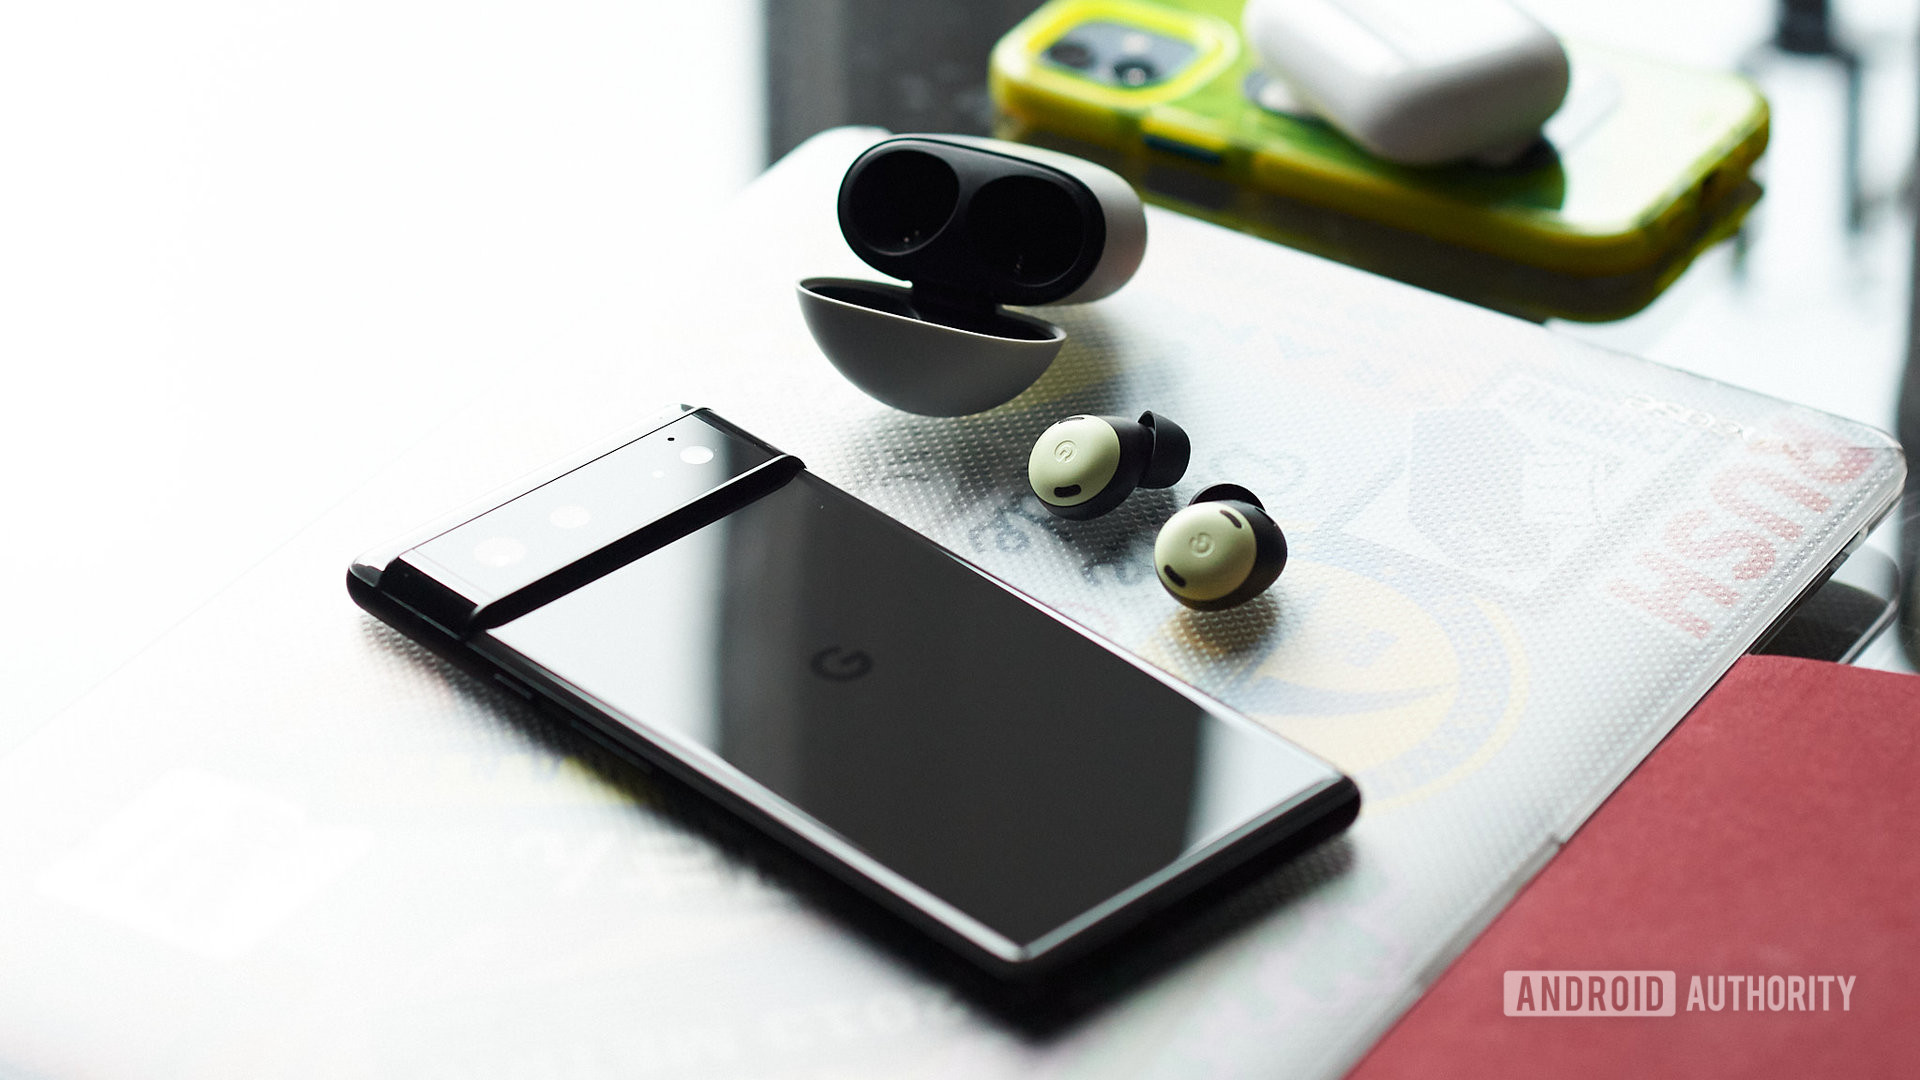 The Google Pixel Buds Pro earbuds outside the open case and next to a Pixel 6 phone.